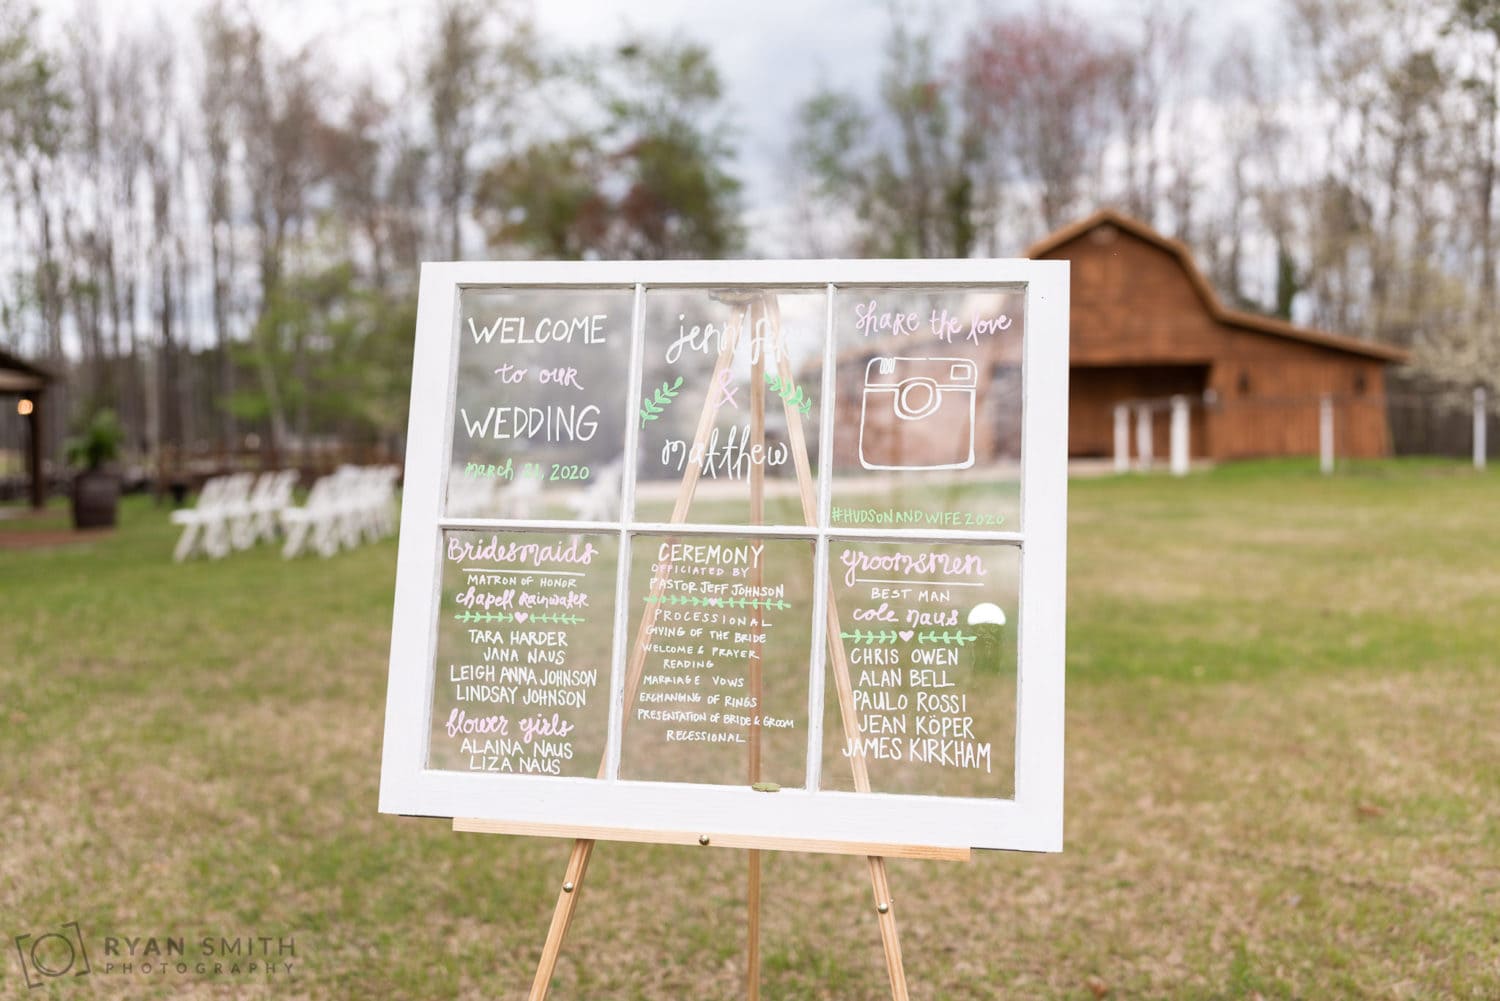 Welcome to our wedding sign - Wildhorse at Parker Farms